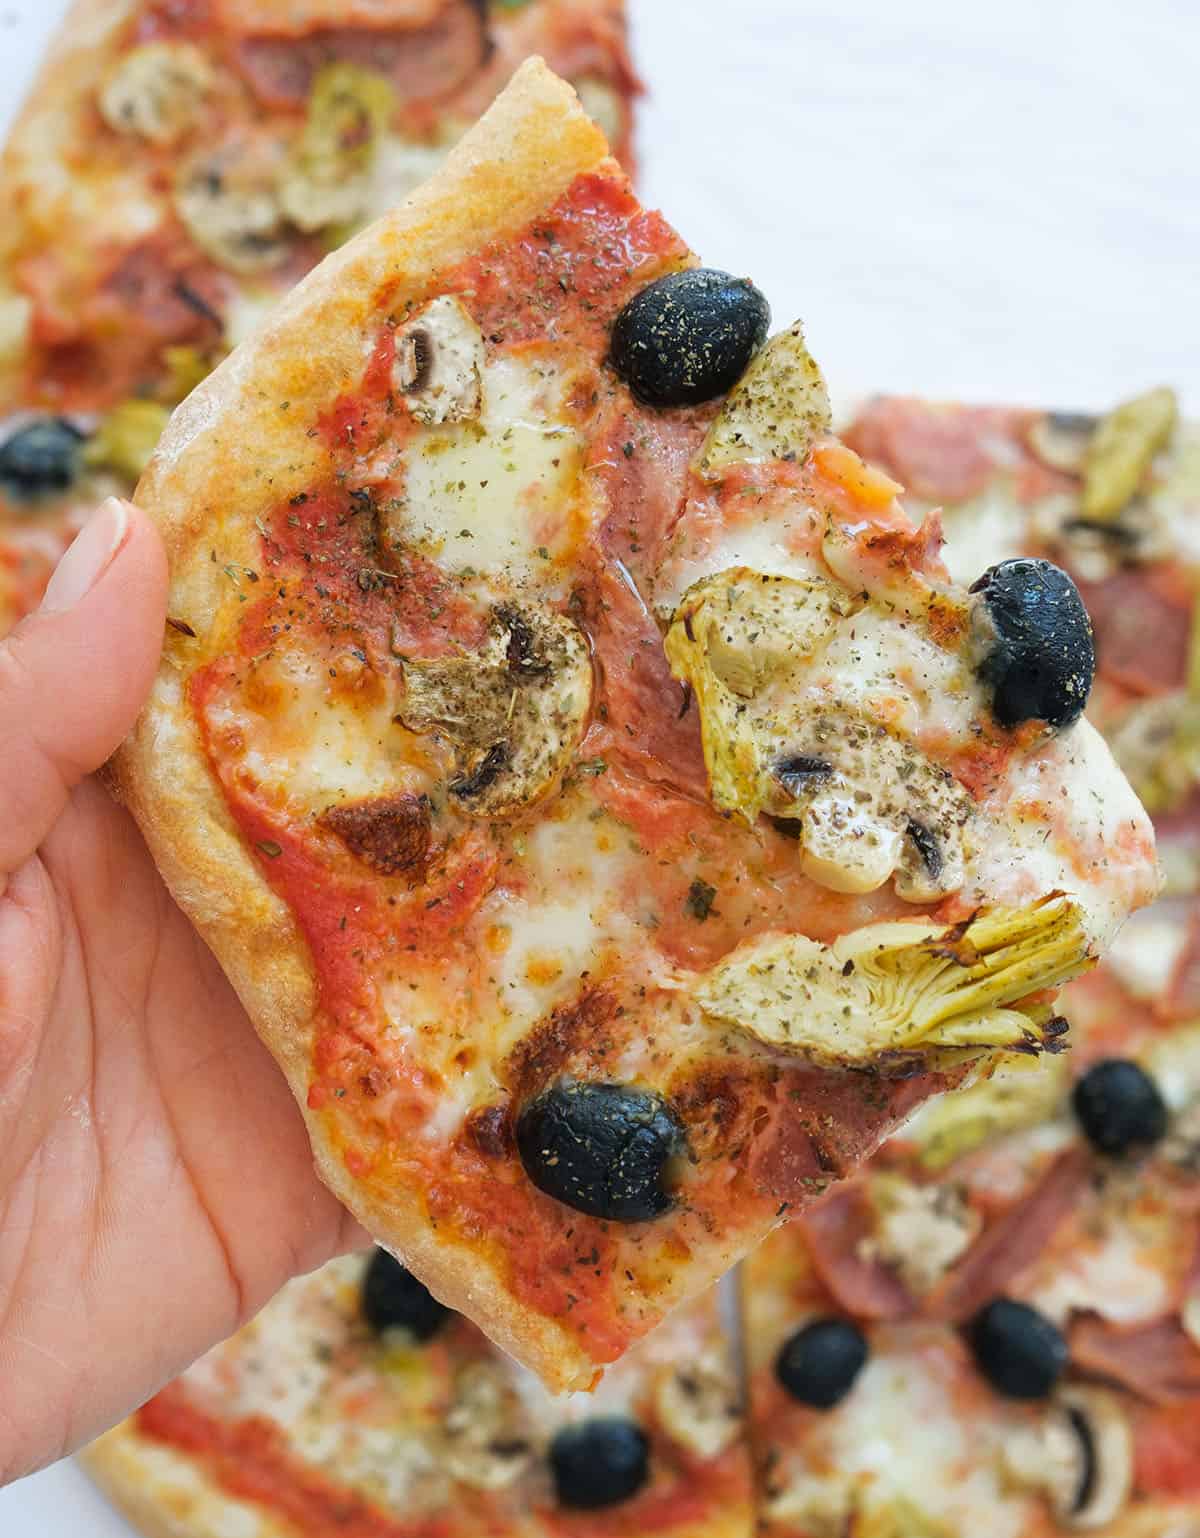 Close-up of a lice of capricciosa pizza topped with black olives, mushrooms and artichokes.